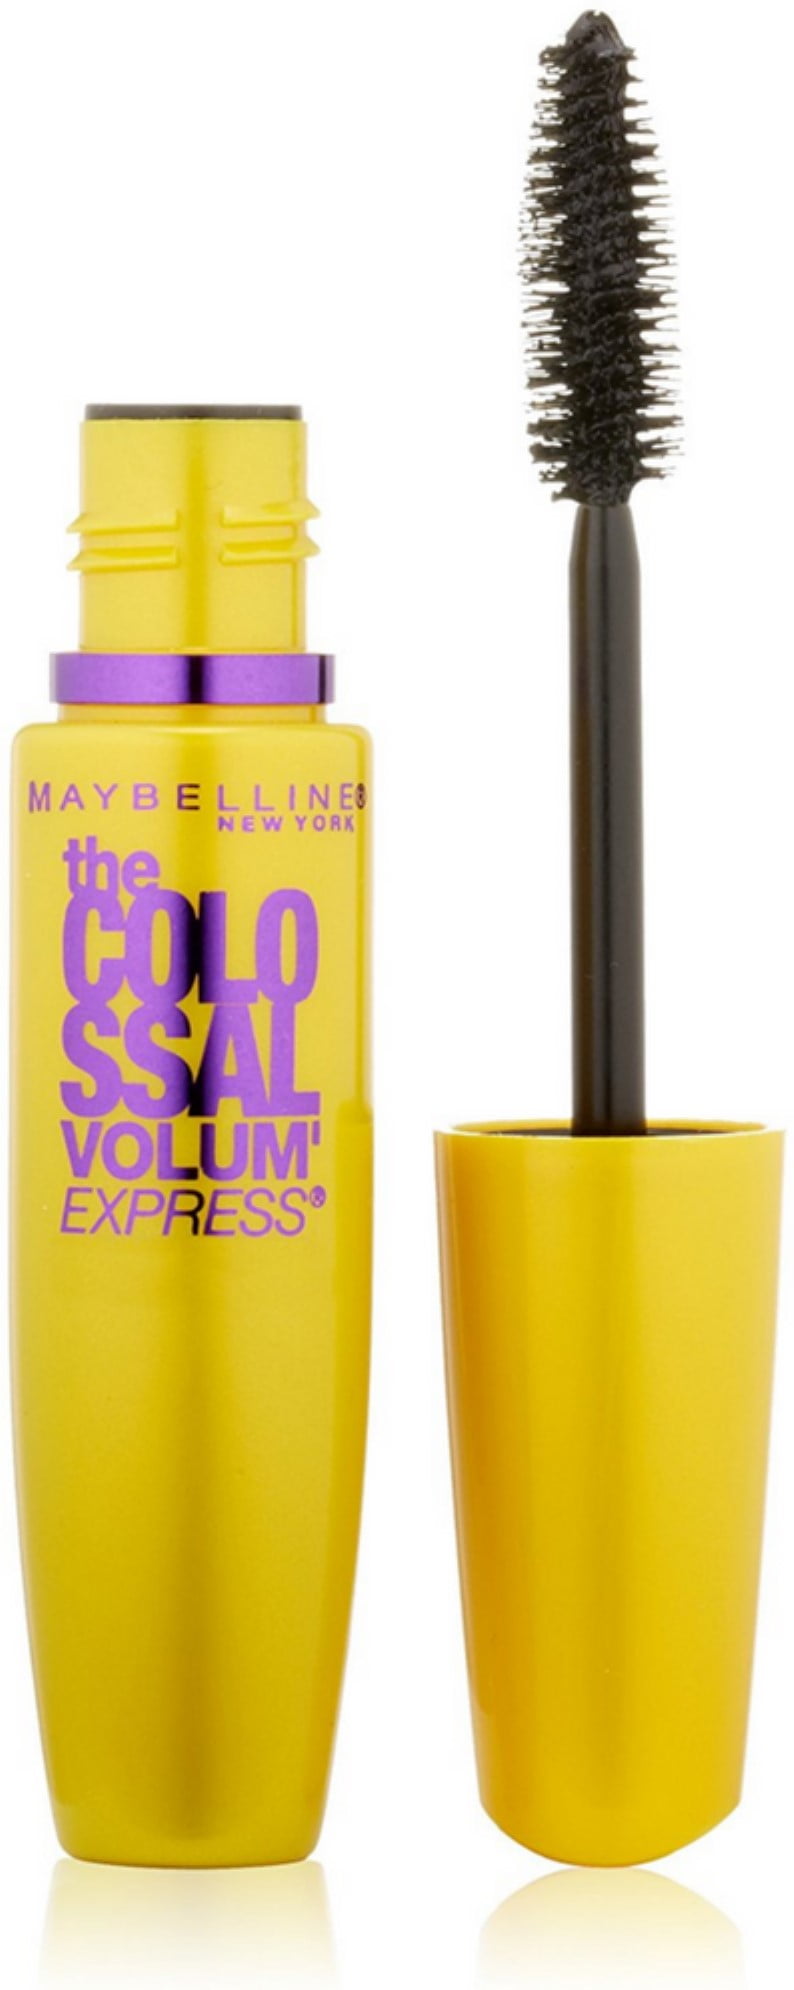 Maybelline The Colossal Express Mascara, Classic [231] 1 Each - Walmart.com